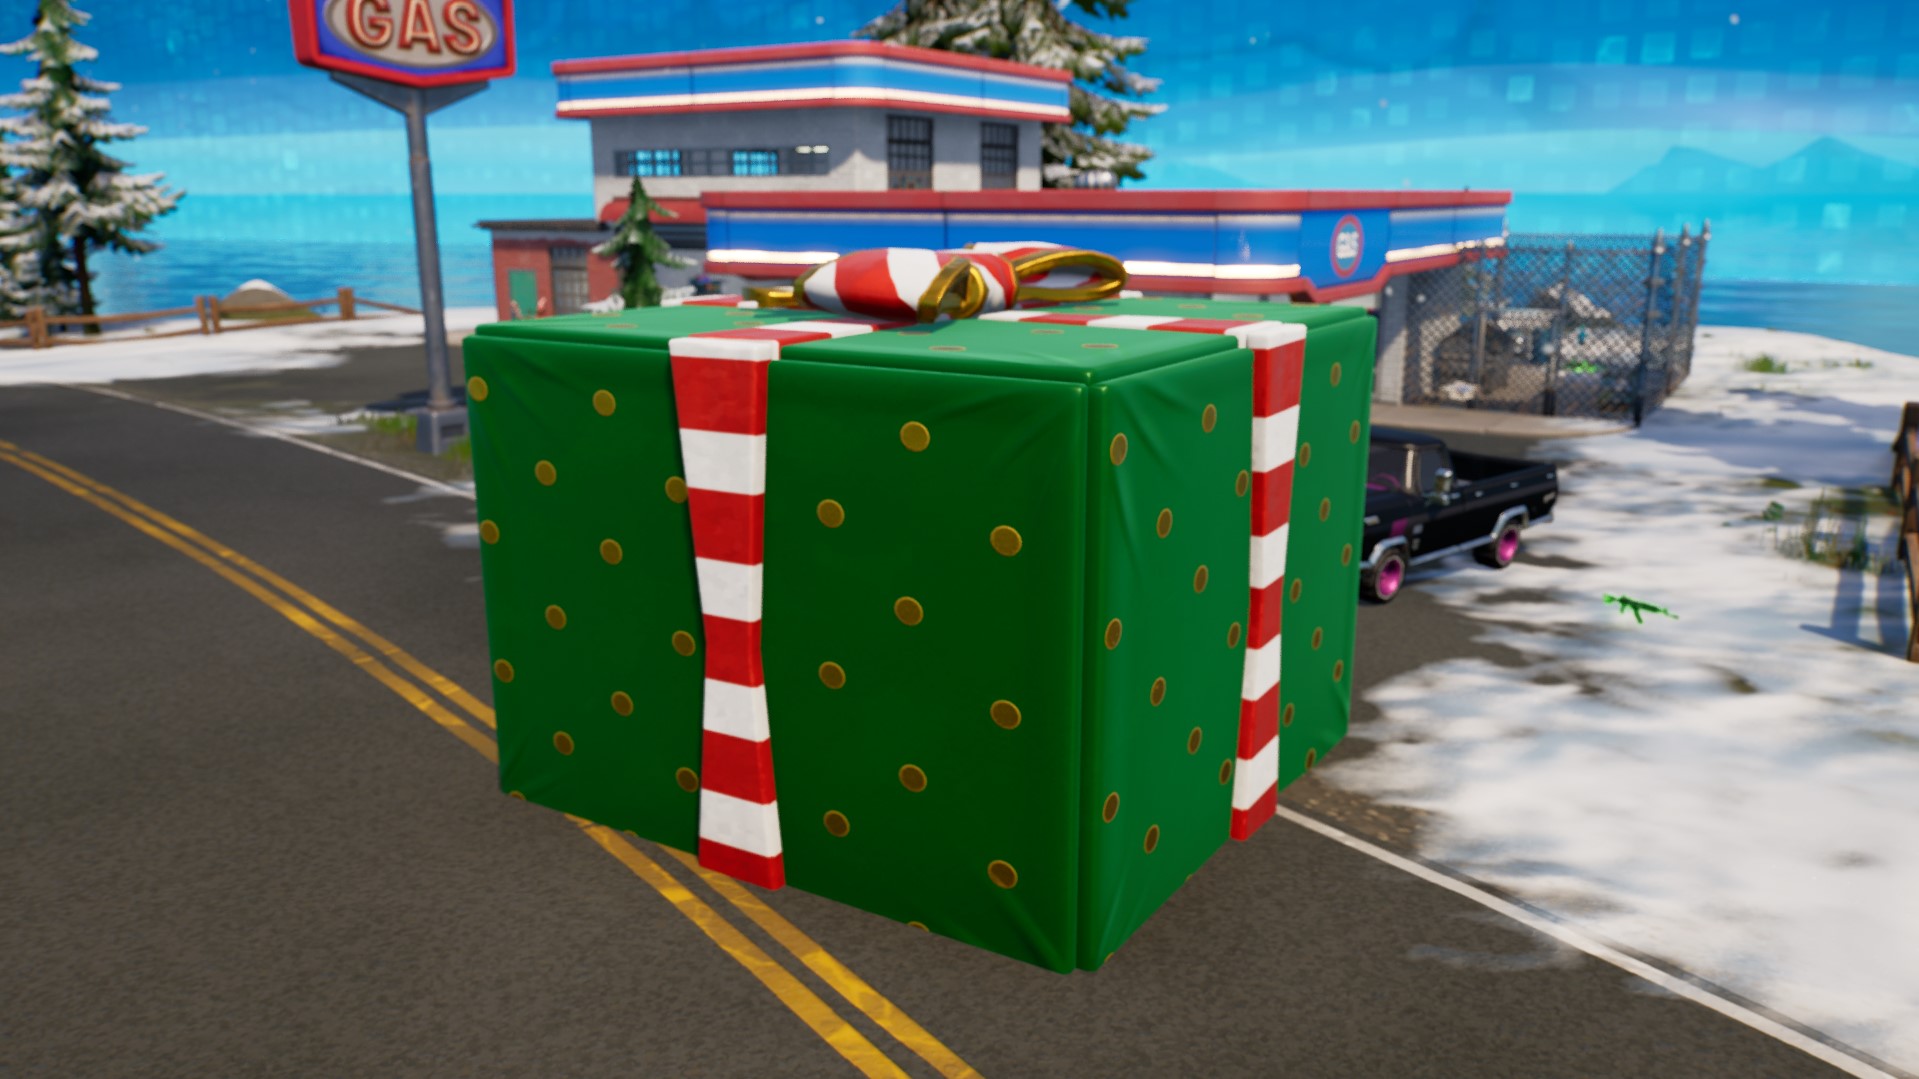 Use a Holiday Presents! item - Winterfest 2021 challenge  